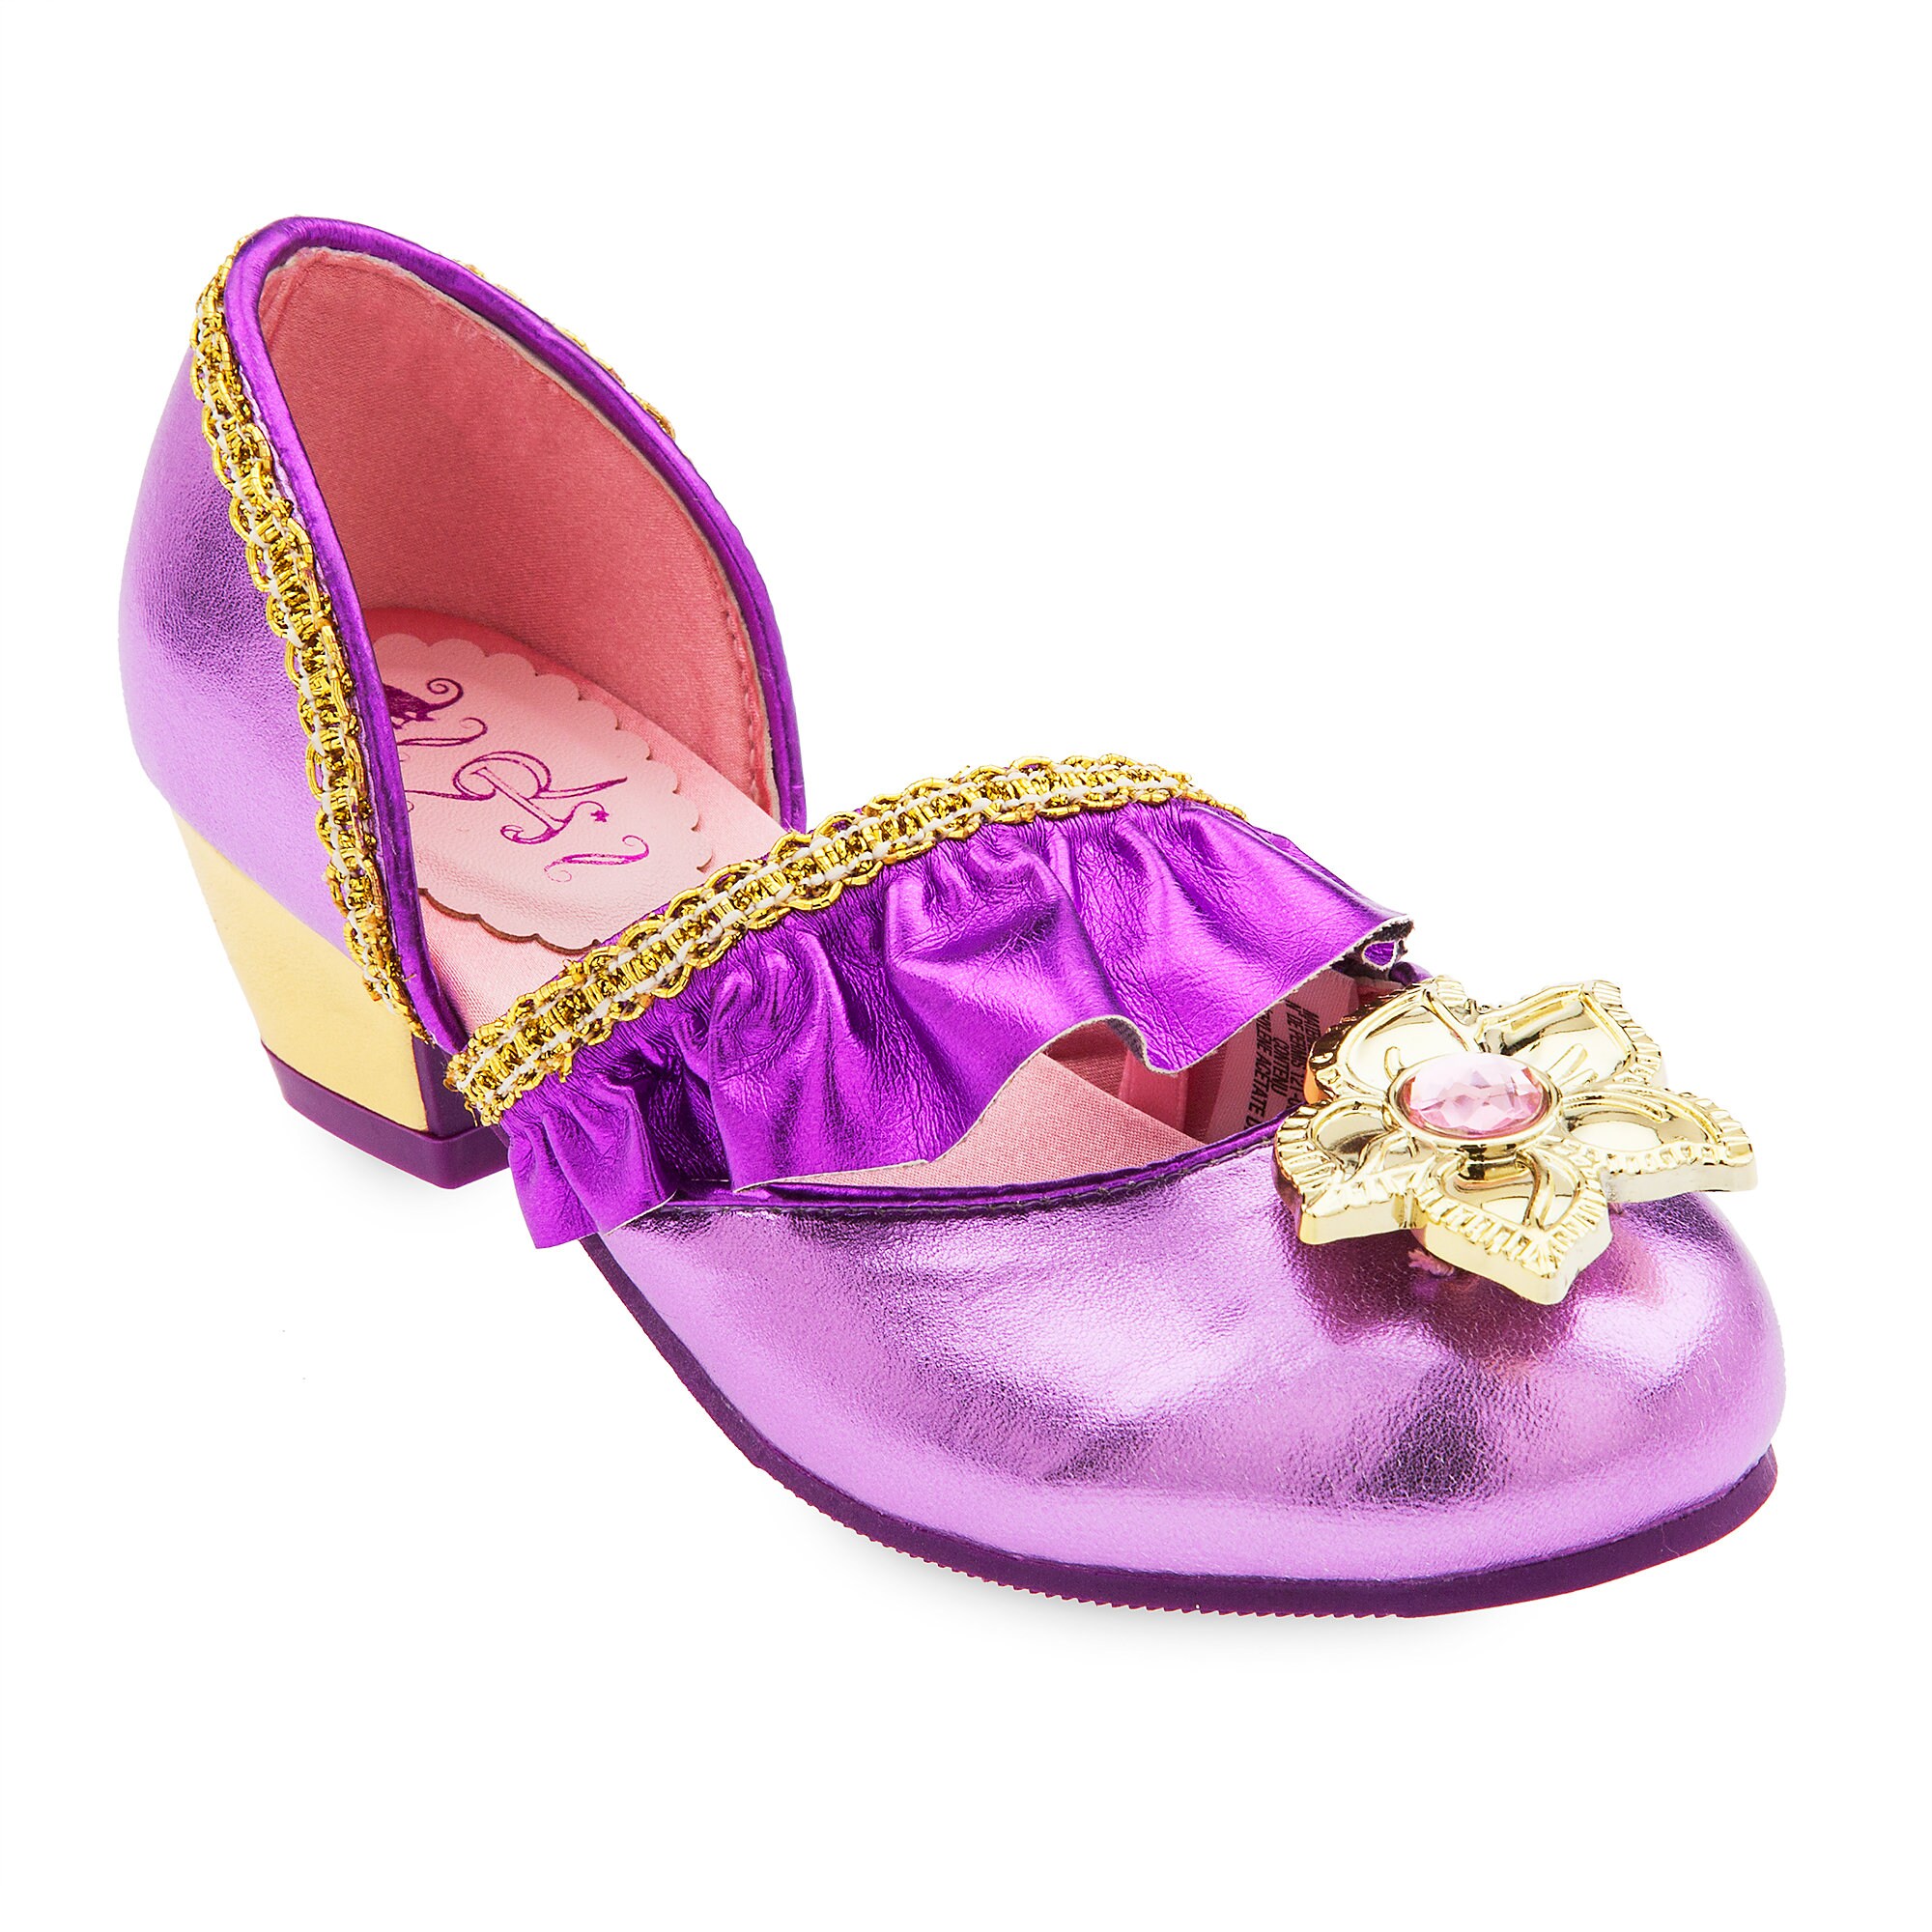 Rapunzel Costume Shoes for Kids - Tangled